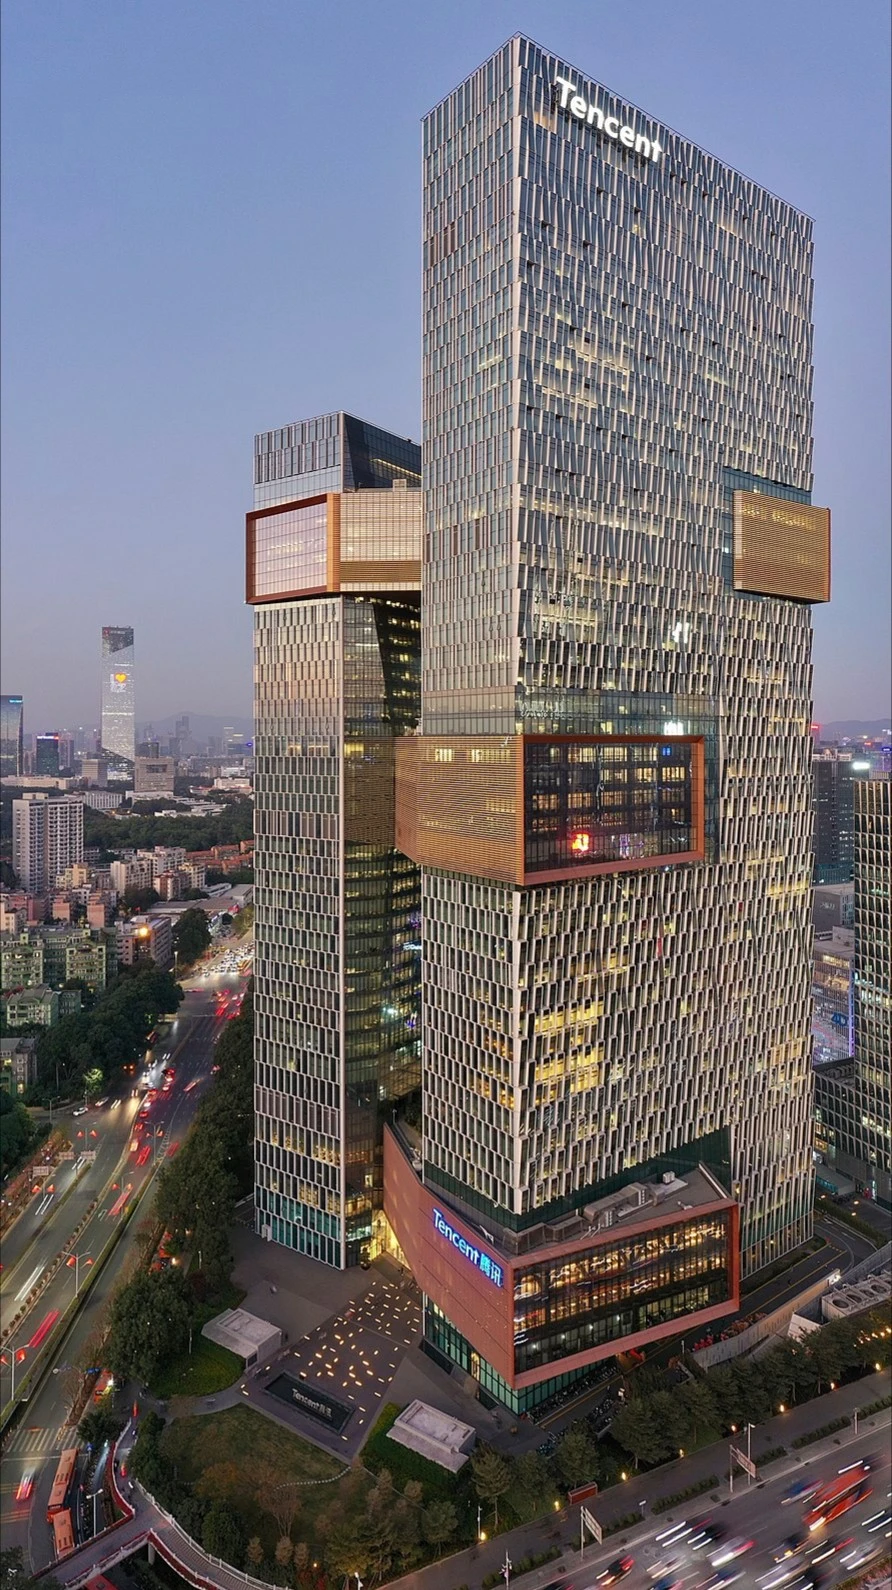 Tencent's headquarters building, symbolizing its expansion after acquiring Bytedance's gaming division.